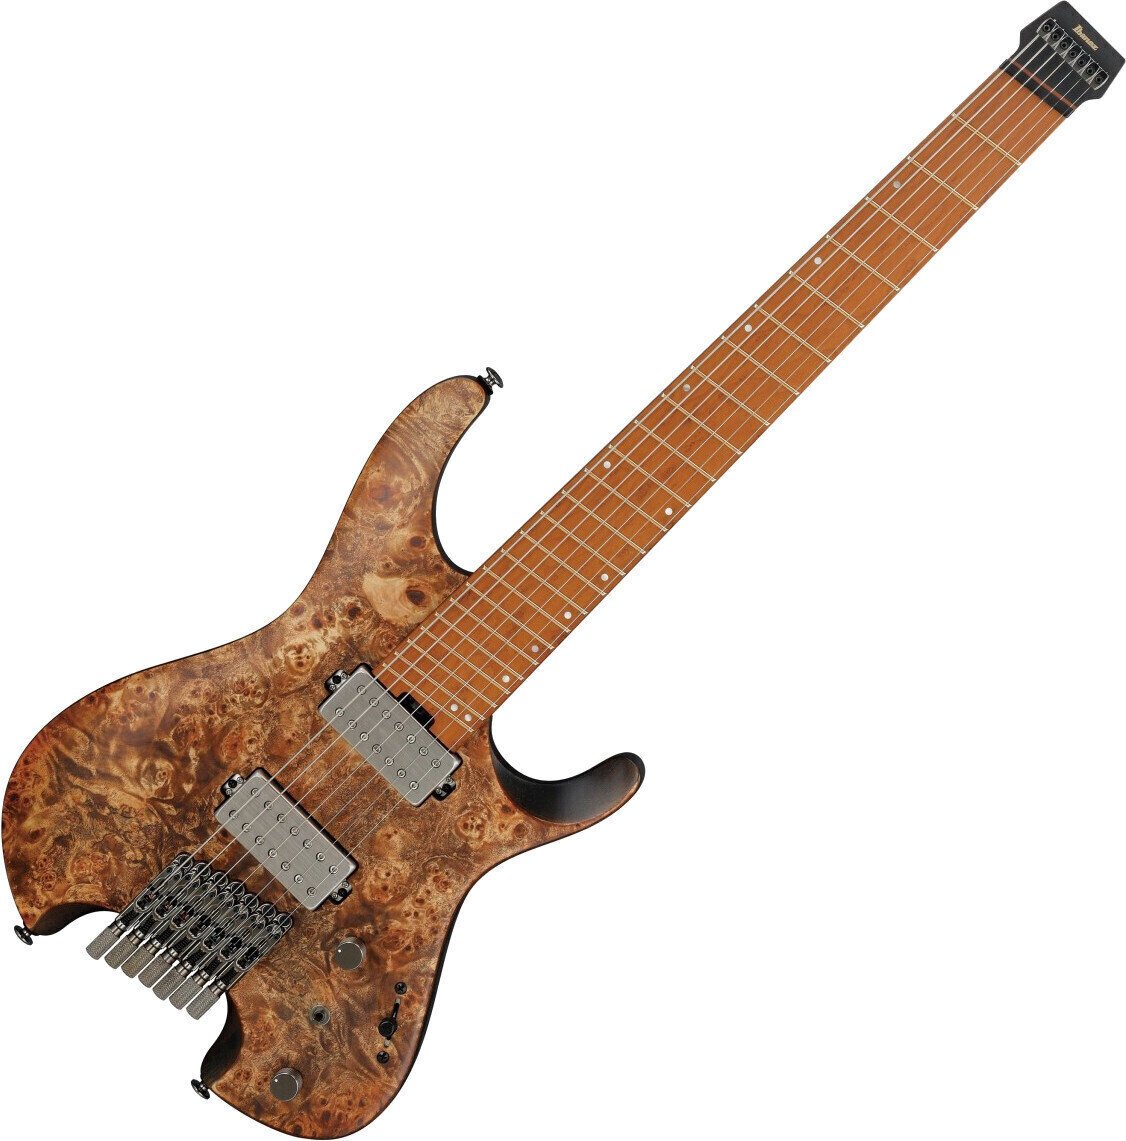 Headless gitaar Ibanez QX527PB-ABS Antique Brown Stained